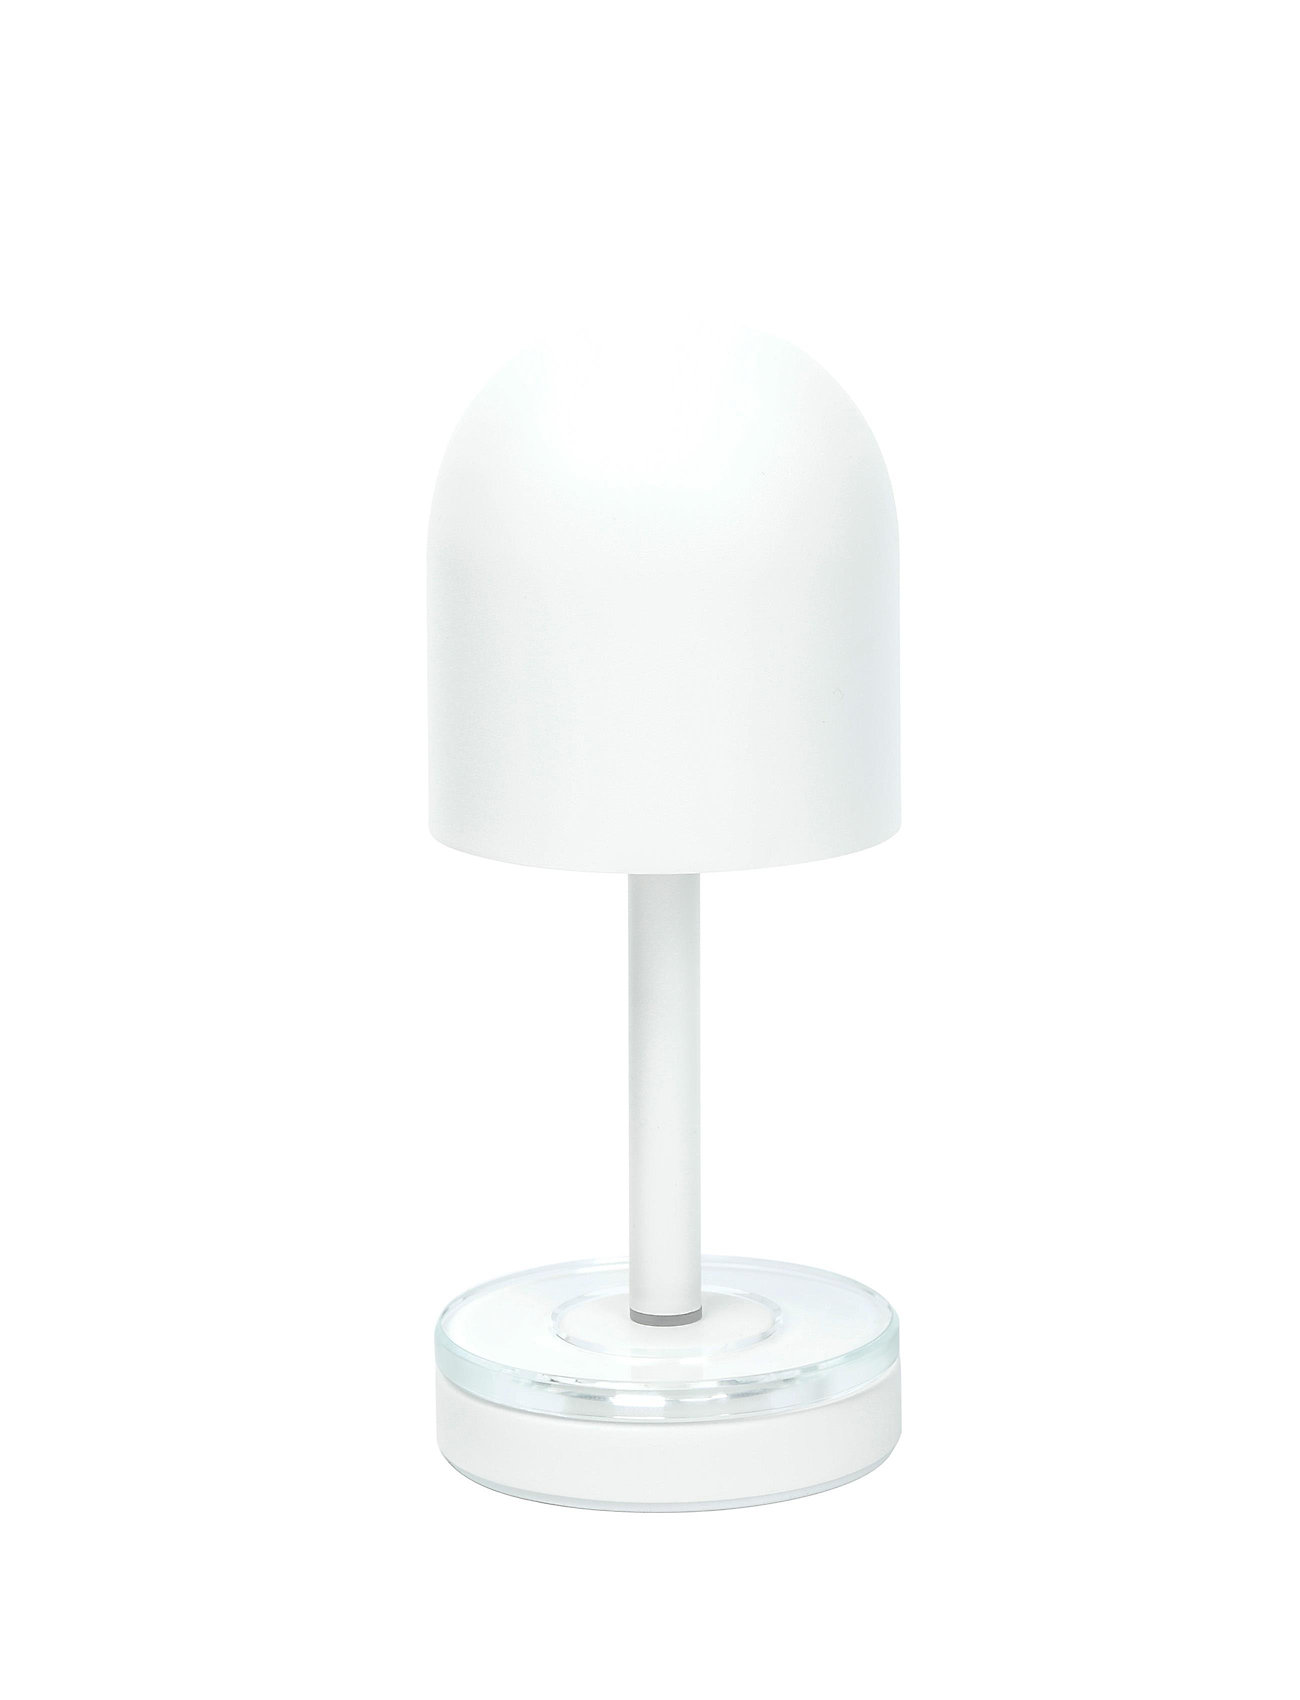 AYTM - LUCEO portable lamp - galda lampas - white/clear - 1